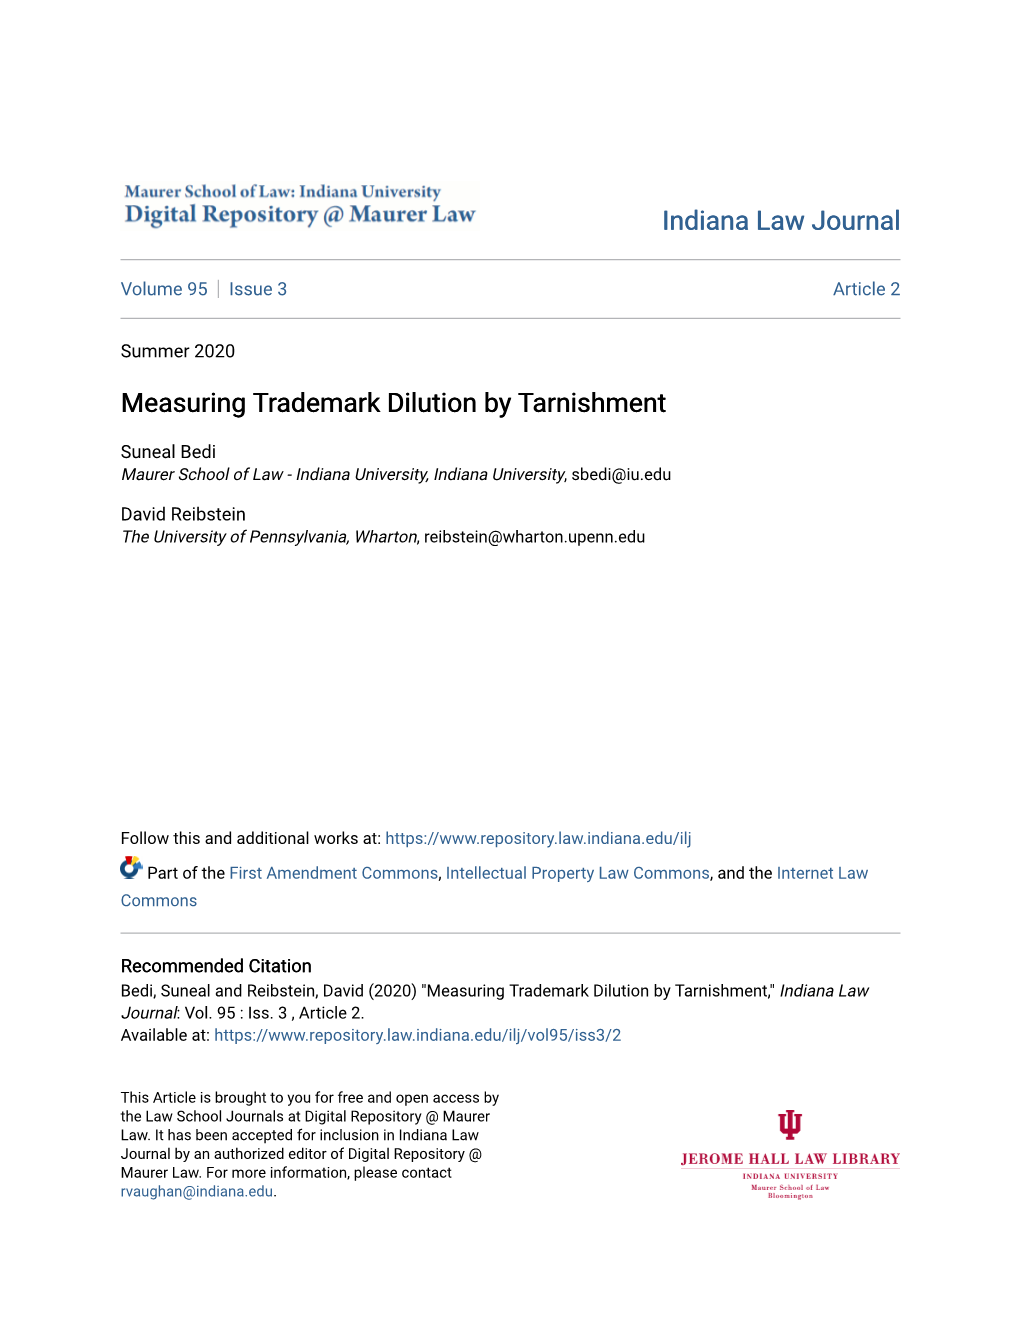 Measuring Trademark Dilution by Tarnishment